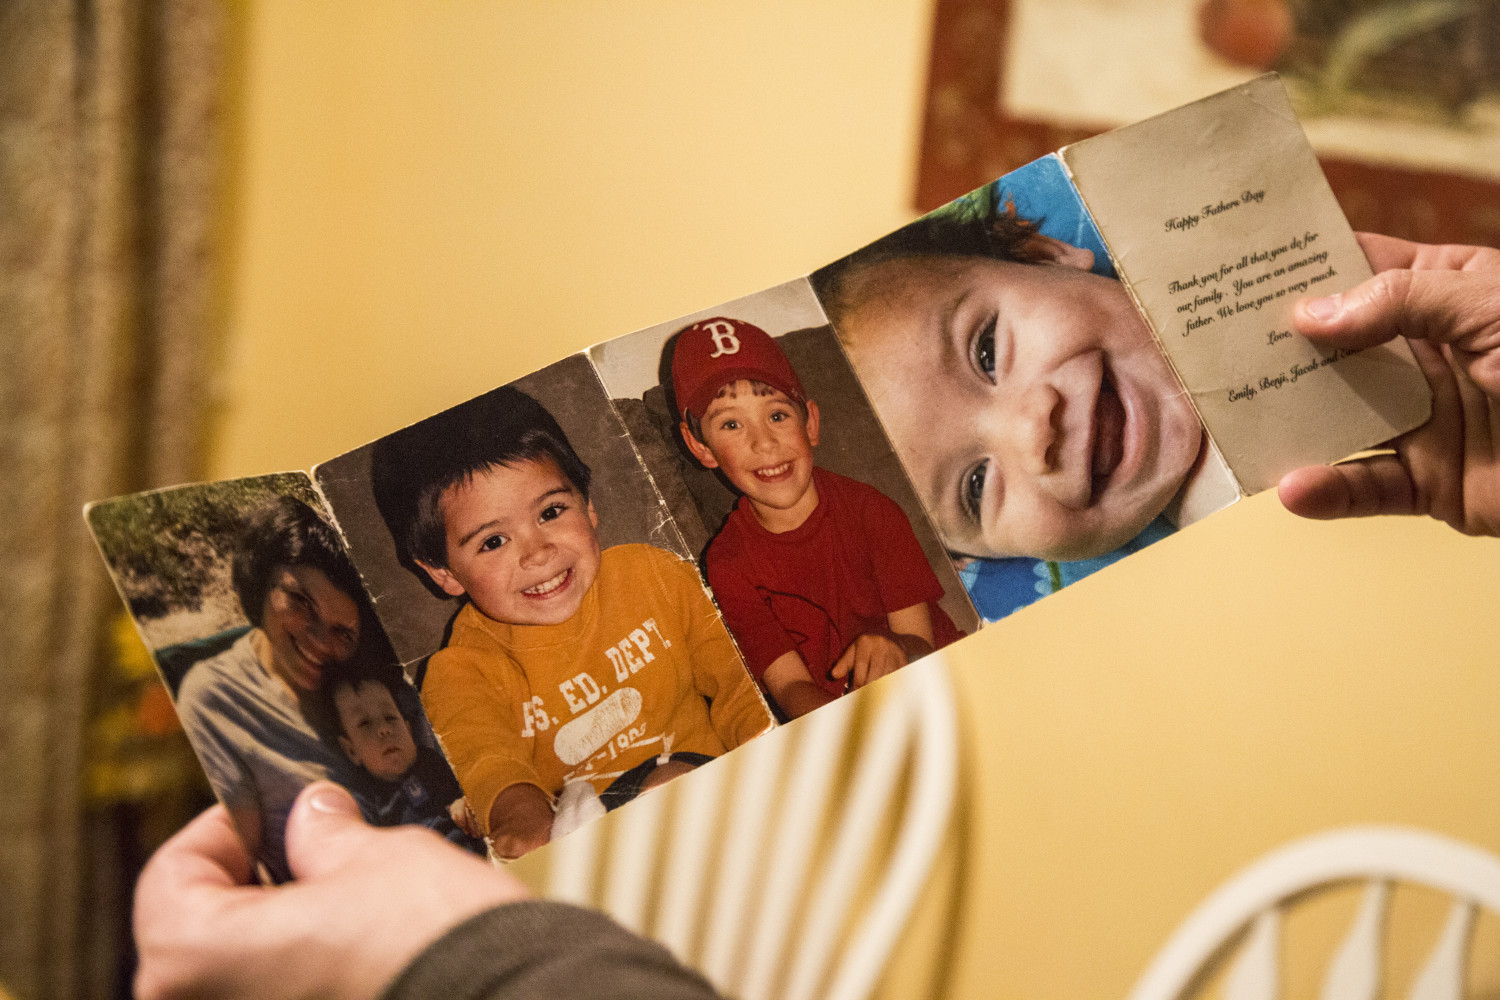 Mark Tidd holds up one of his favorite Father's Day gifts, a folded display of photos of his children, including his daughter Lucy Tidd, in the red baseball cap, in Portland.